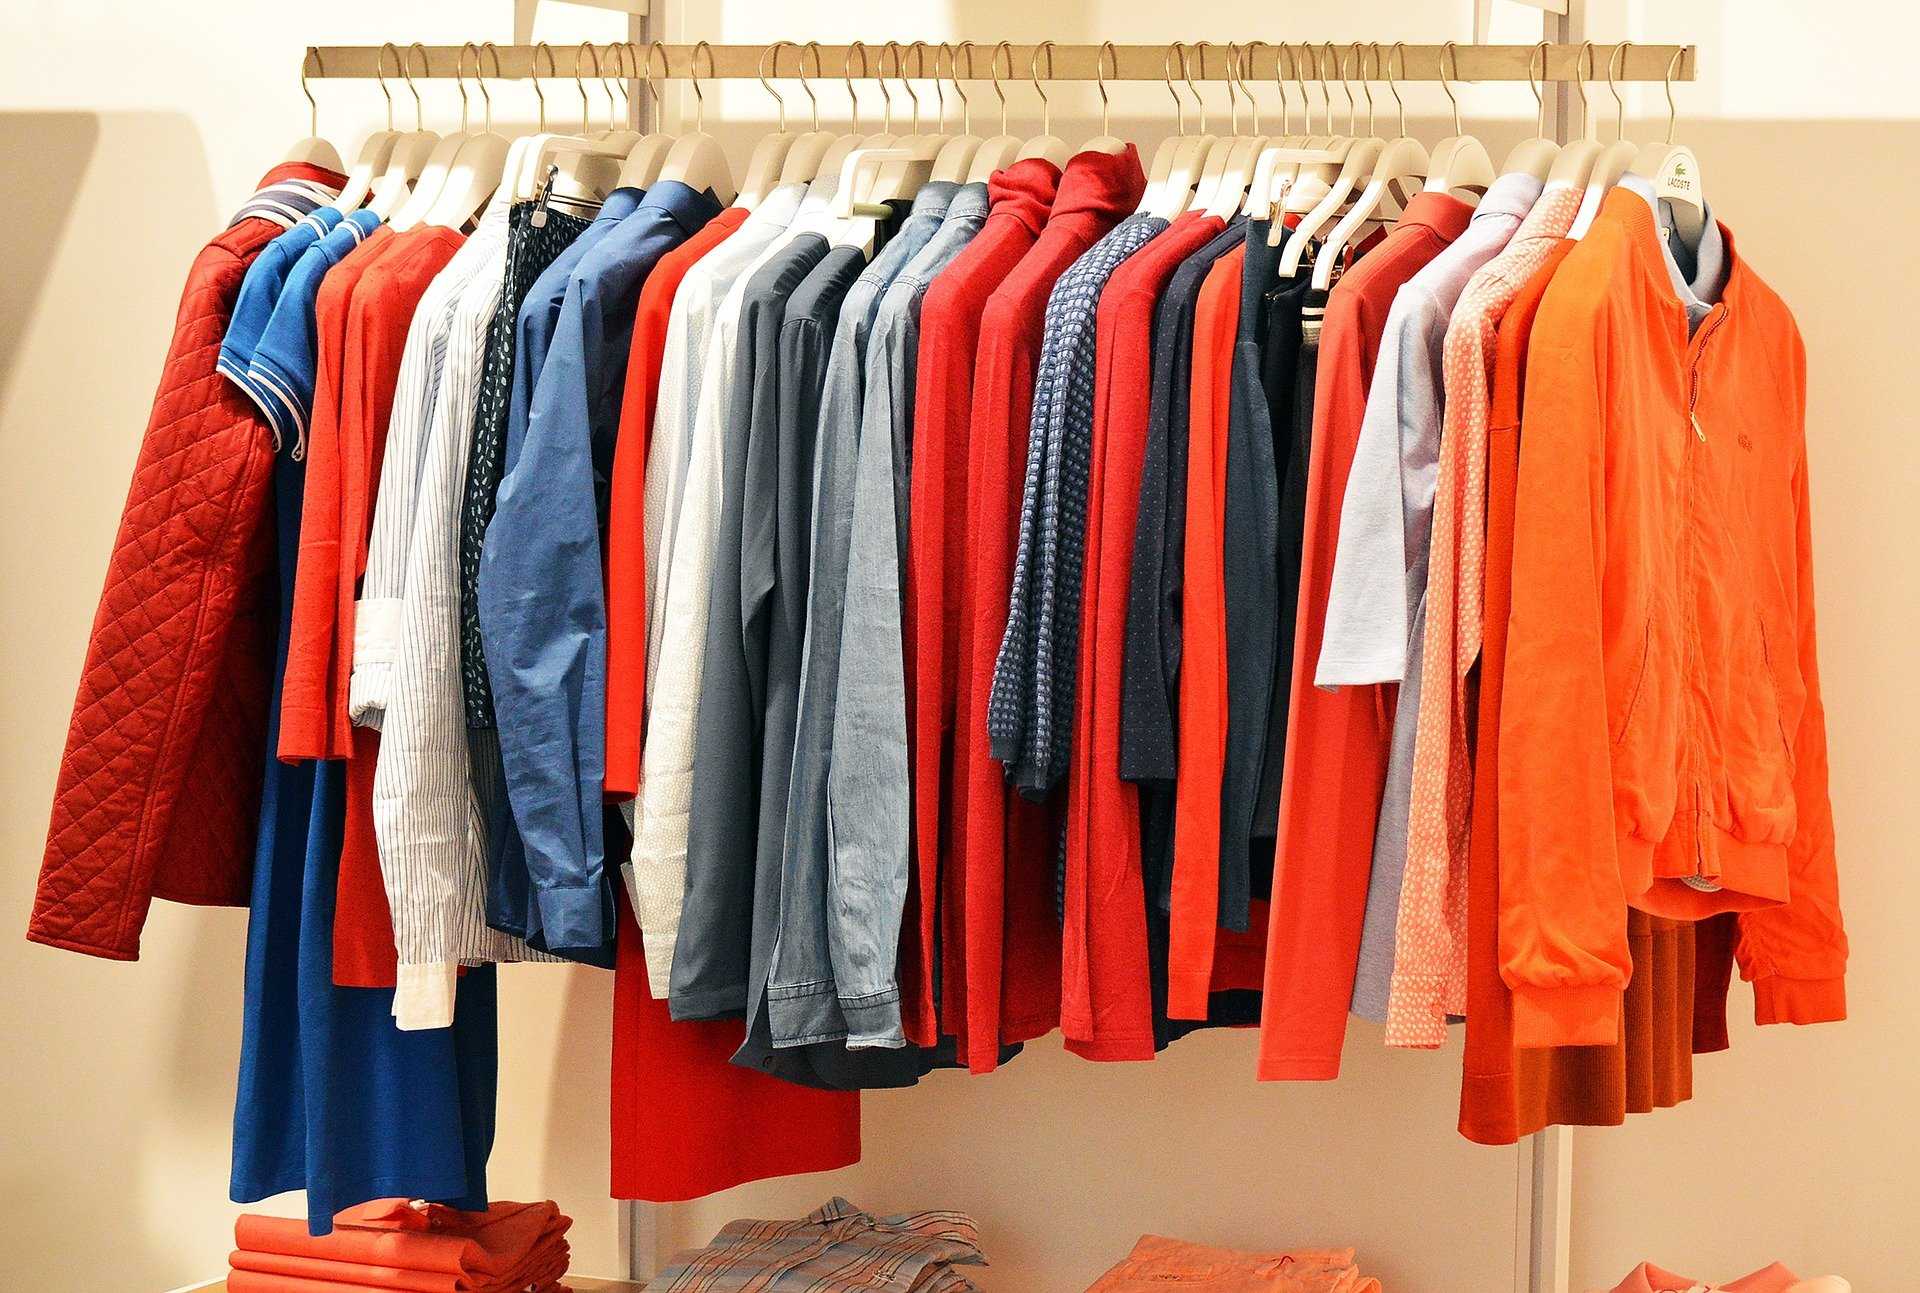 EHHD Clothing Closet - College of Education, Health and Human